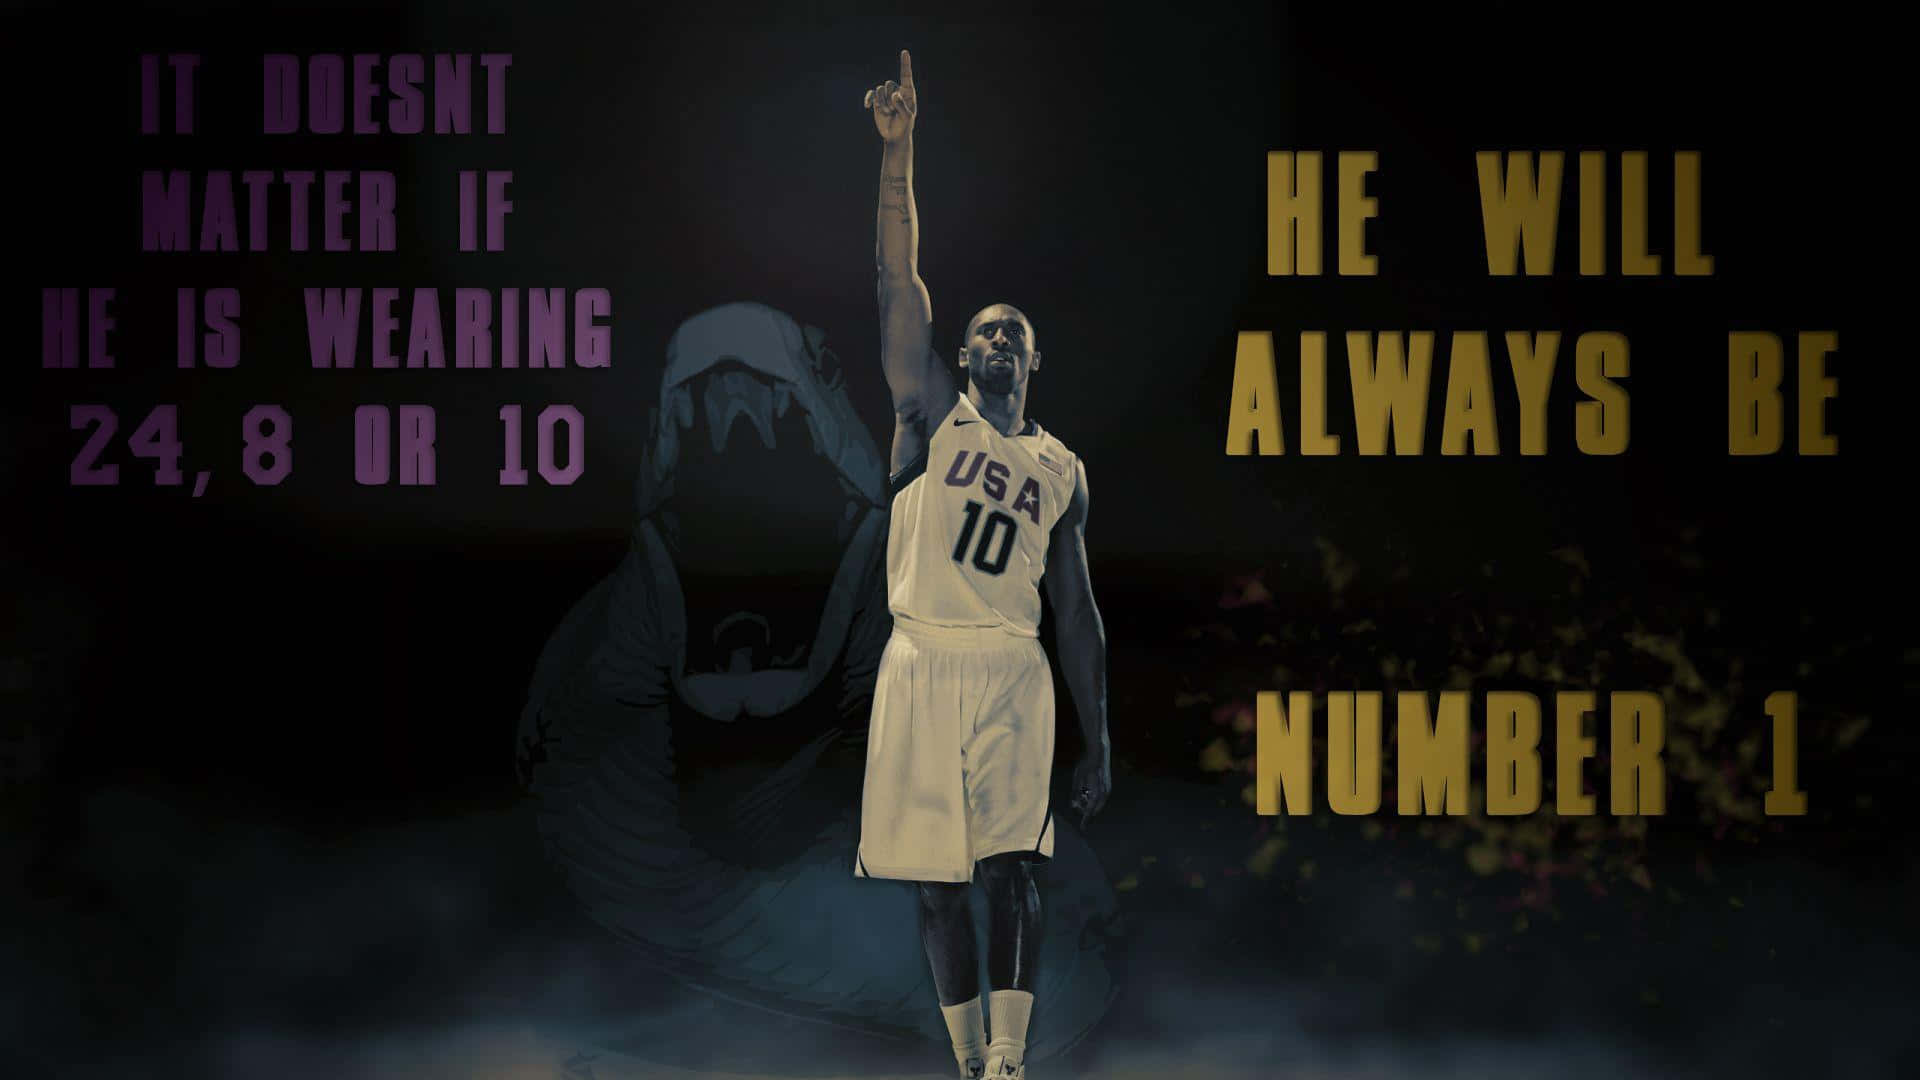 Live with the Mamba Mentality Wallpaper